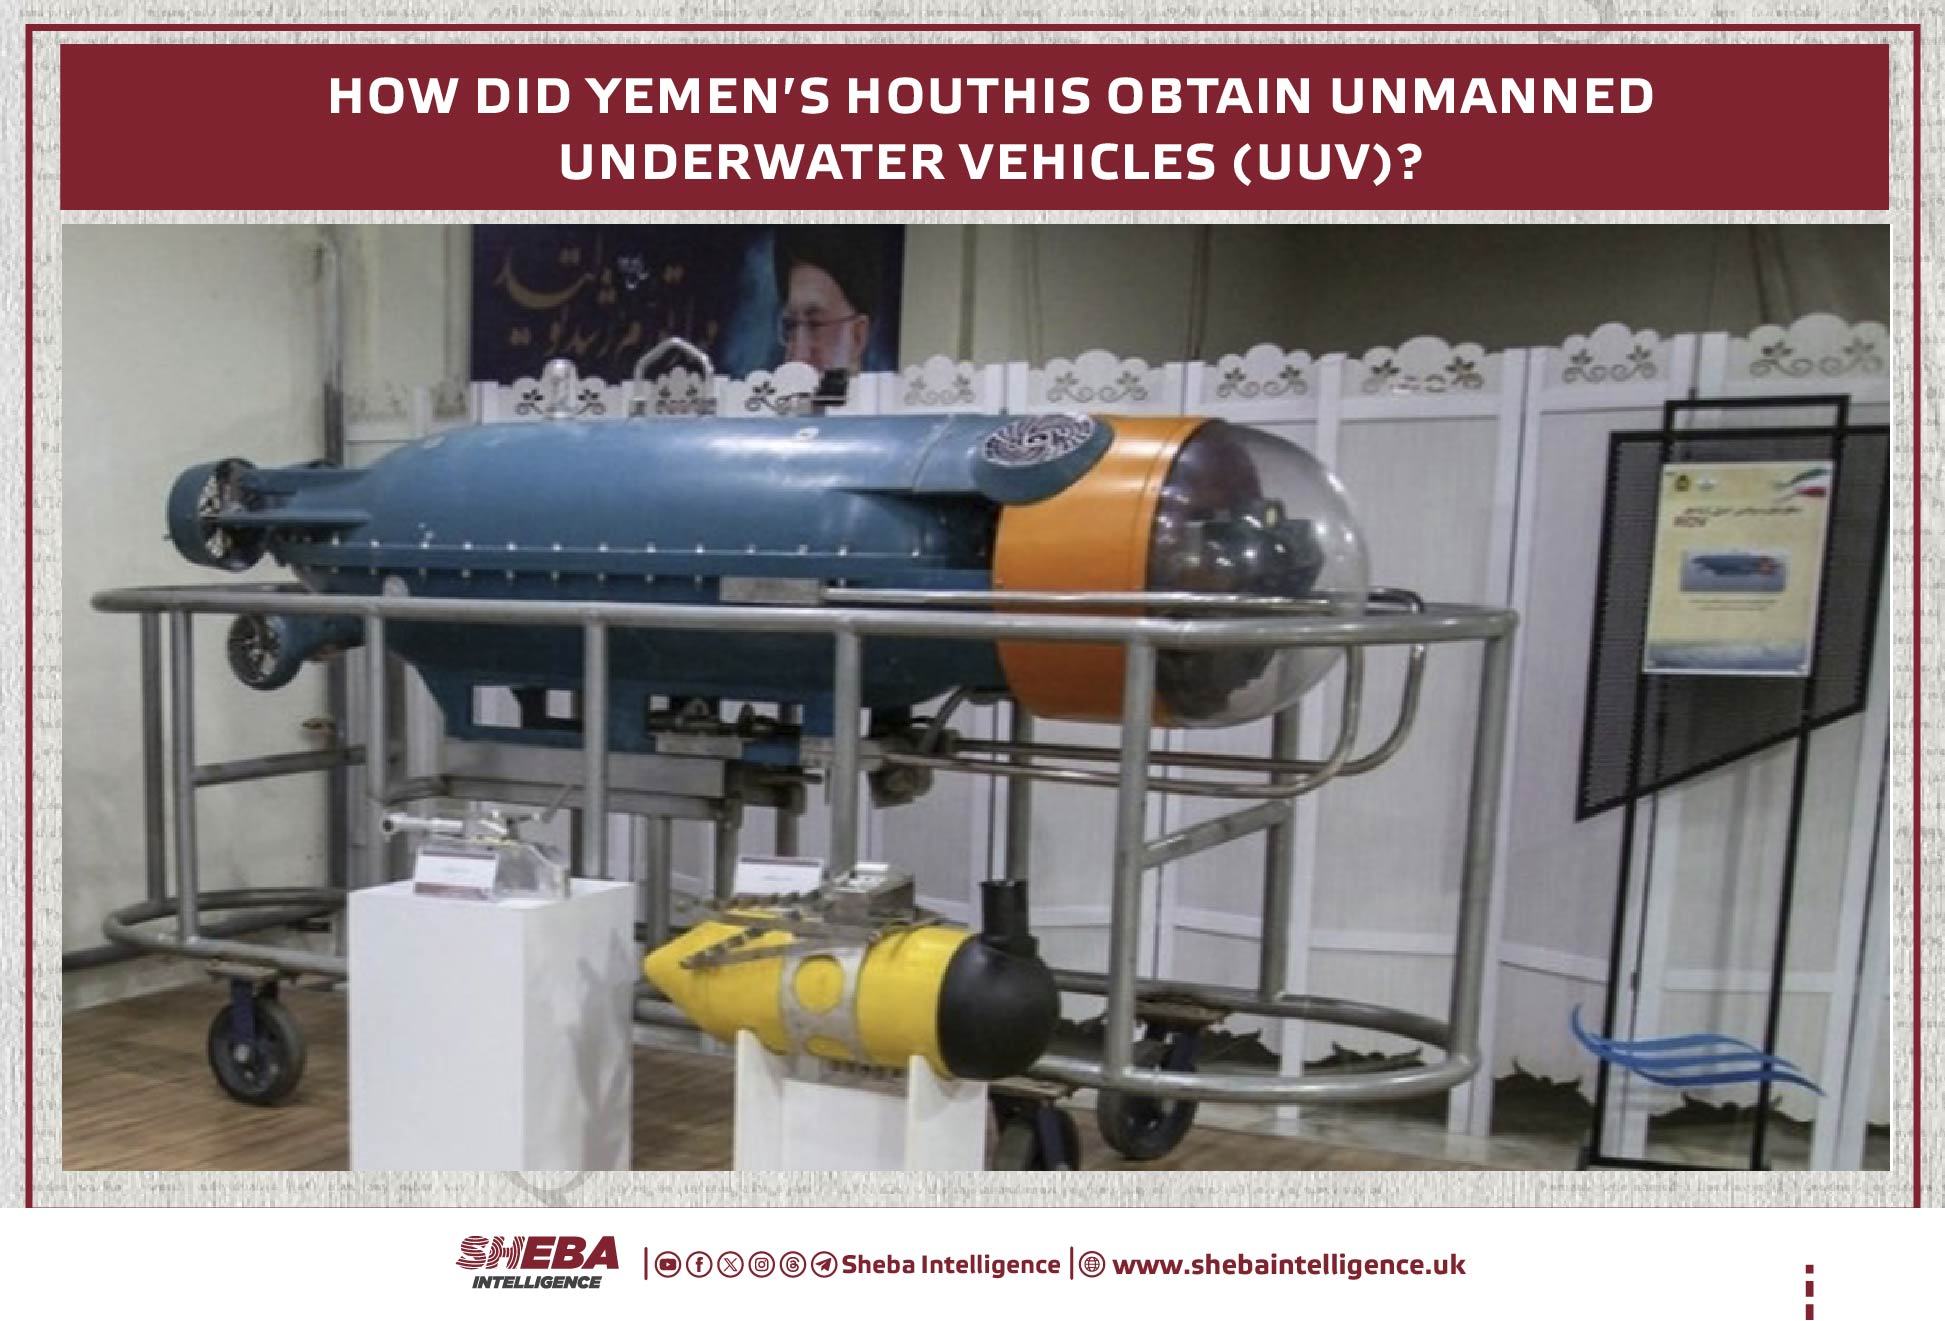 How Did Yemen's Houthis Obtain Unmanned Underwater Vehicles (UUV)?